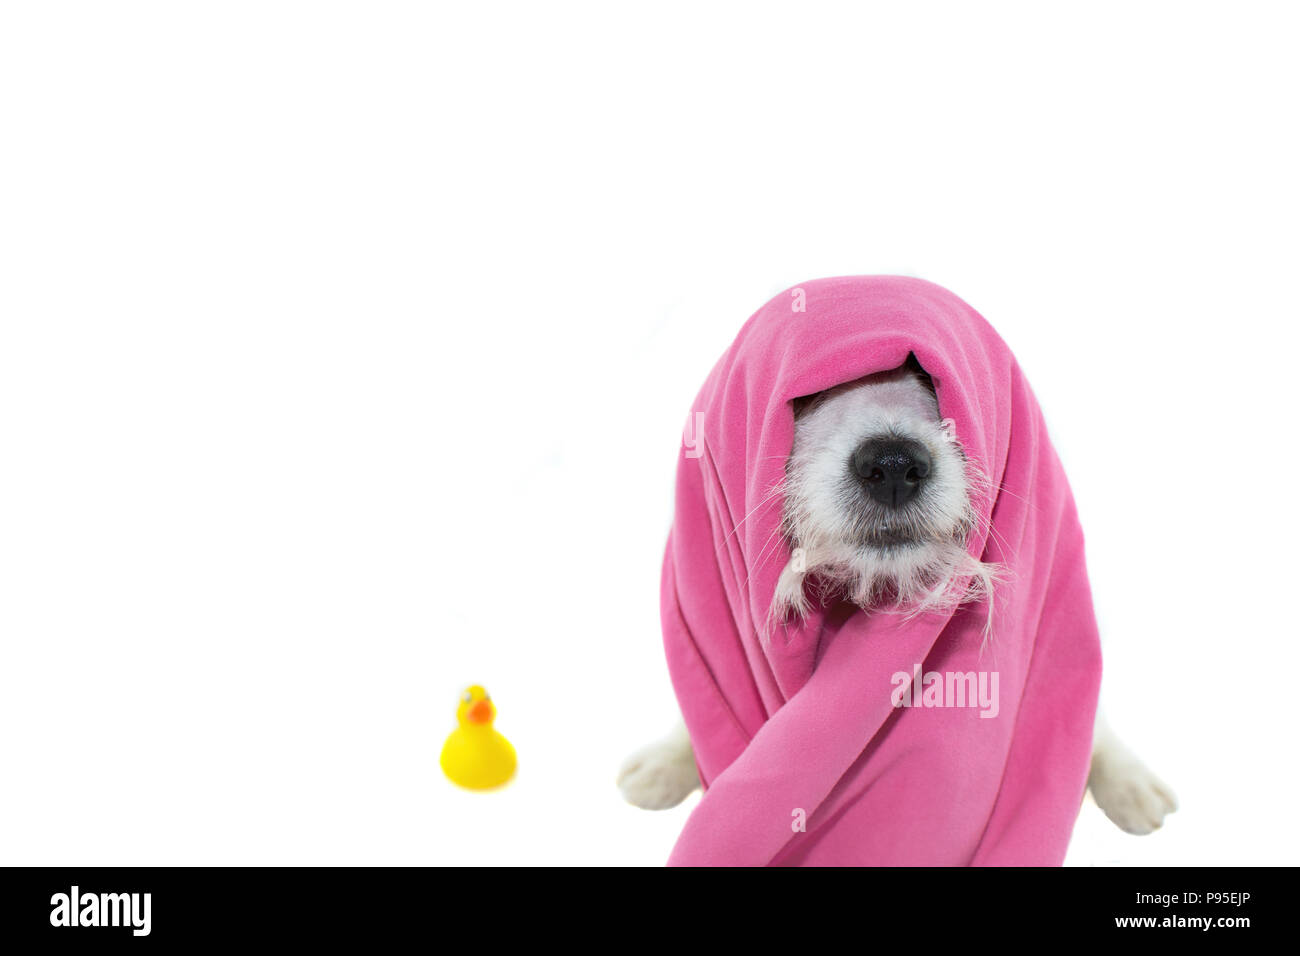 CUTE JACK RUSSELL DOG WAITING FOR A BATH WITH A PINK TOWEL ON HEAD AND ITS  YELLOW RUBBER DUCKY. ISOLATED ON WHITE BACKGROUND Stock Photo